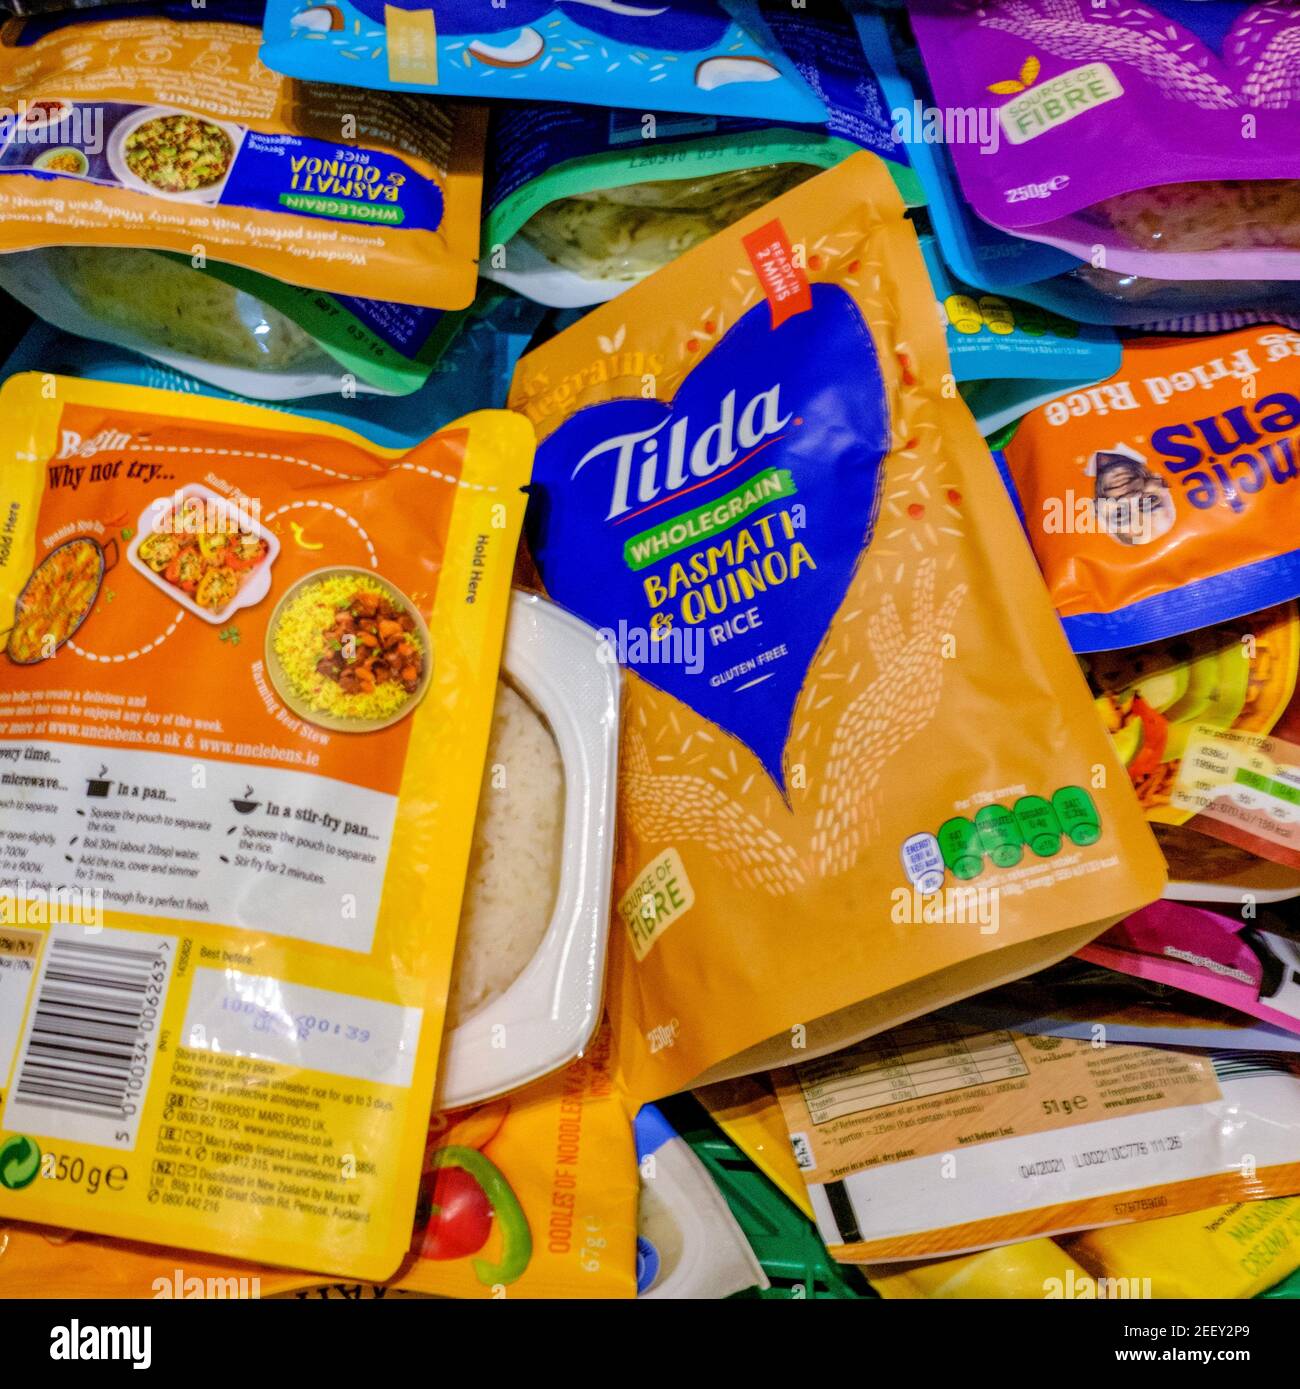 Crate of microwaveable packets of rice as part of dried food donations donated to a Trussell Trust foodbank. Microwave rice in plastic packaging. Stock Photo